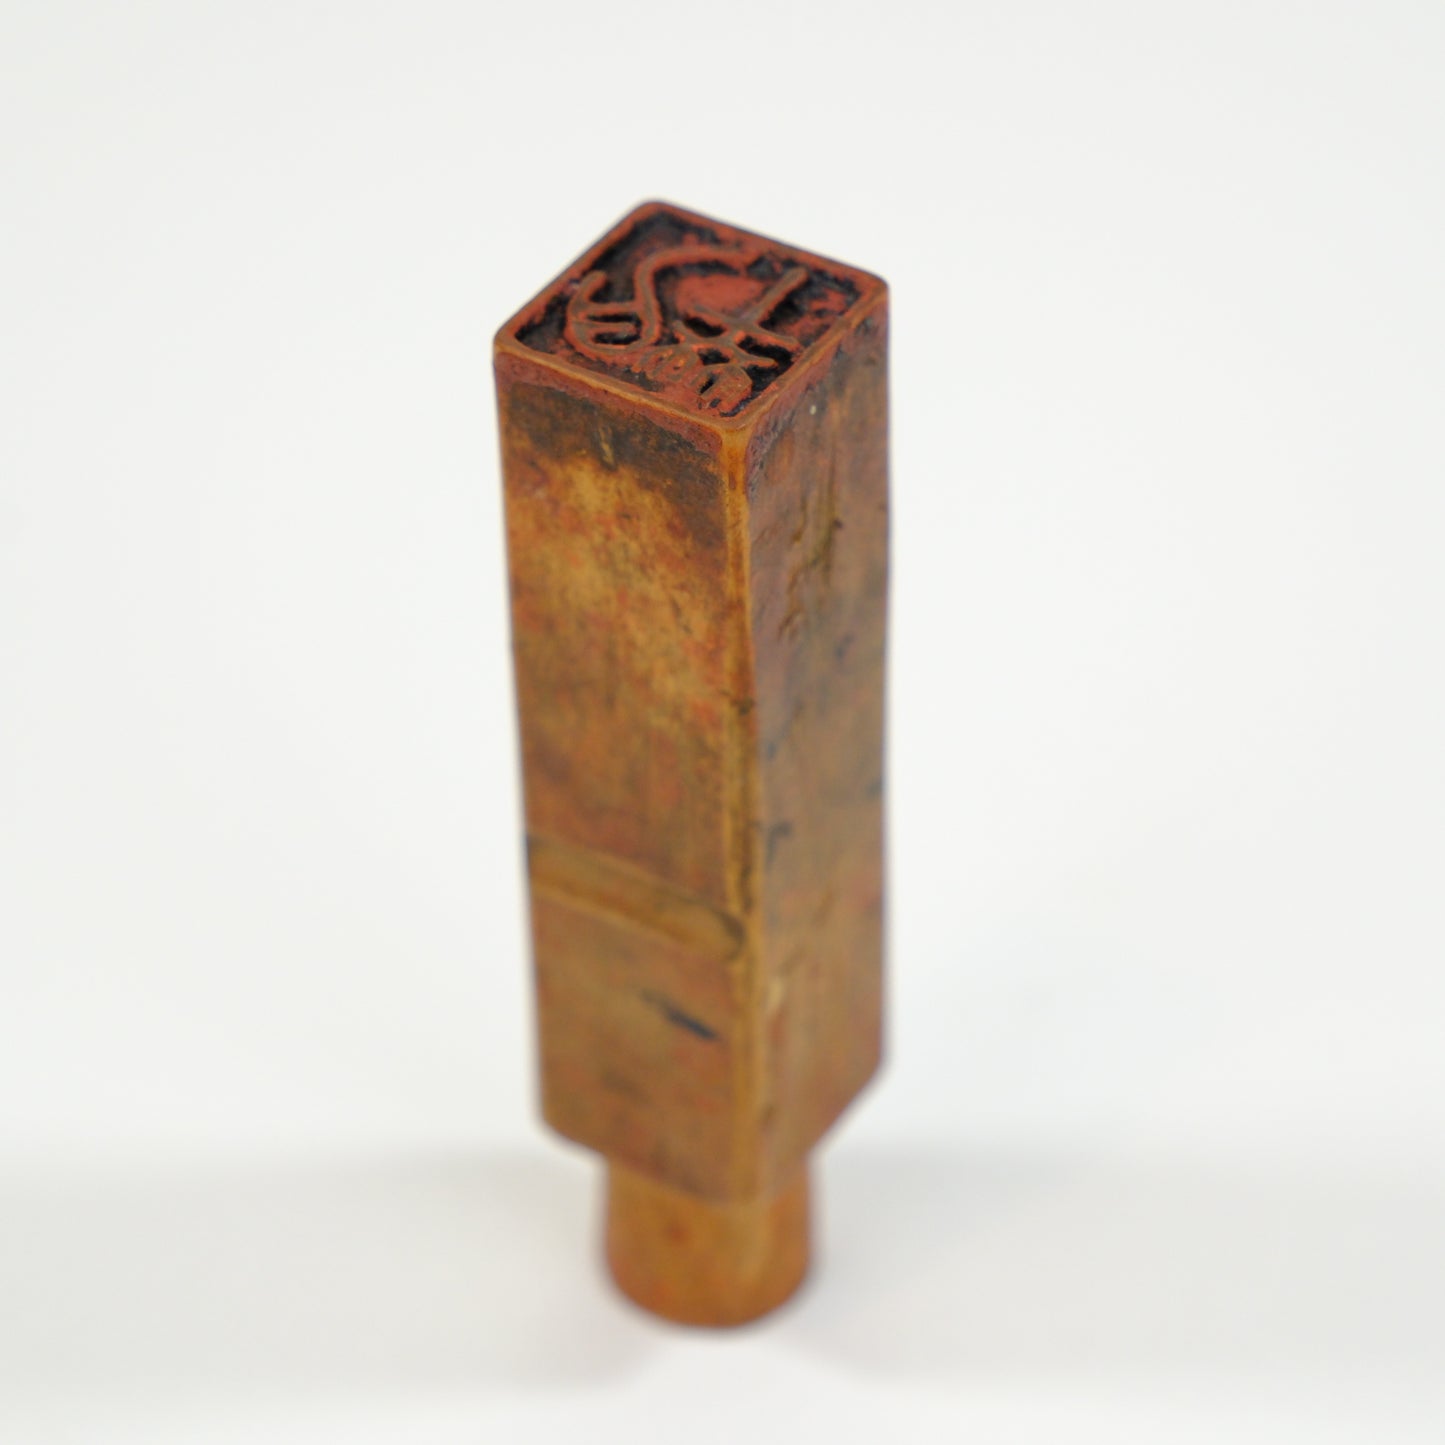 Antique Handcarved Inkan Boxwood Stamp 2.5"